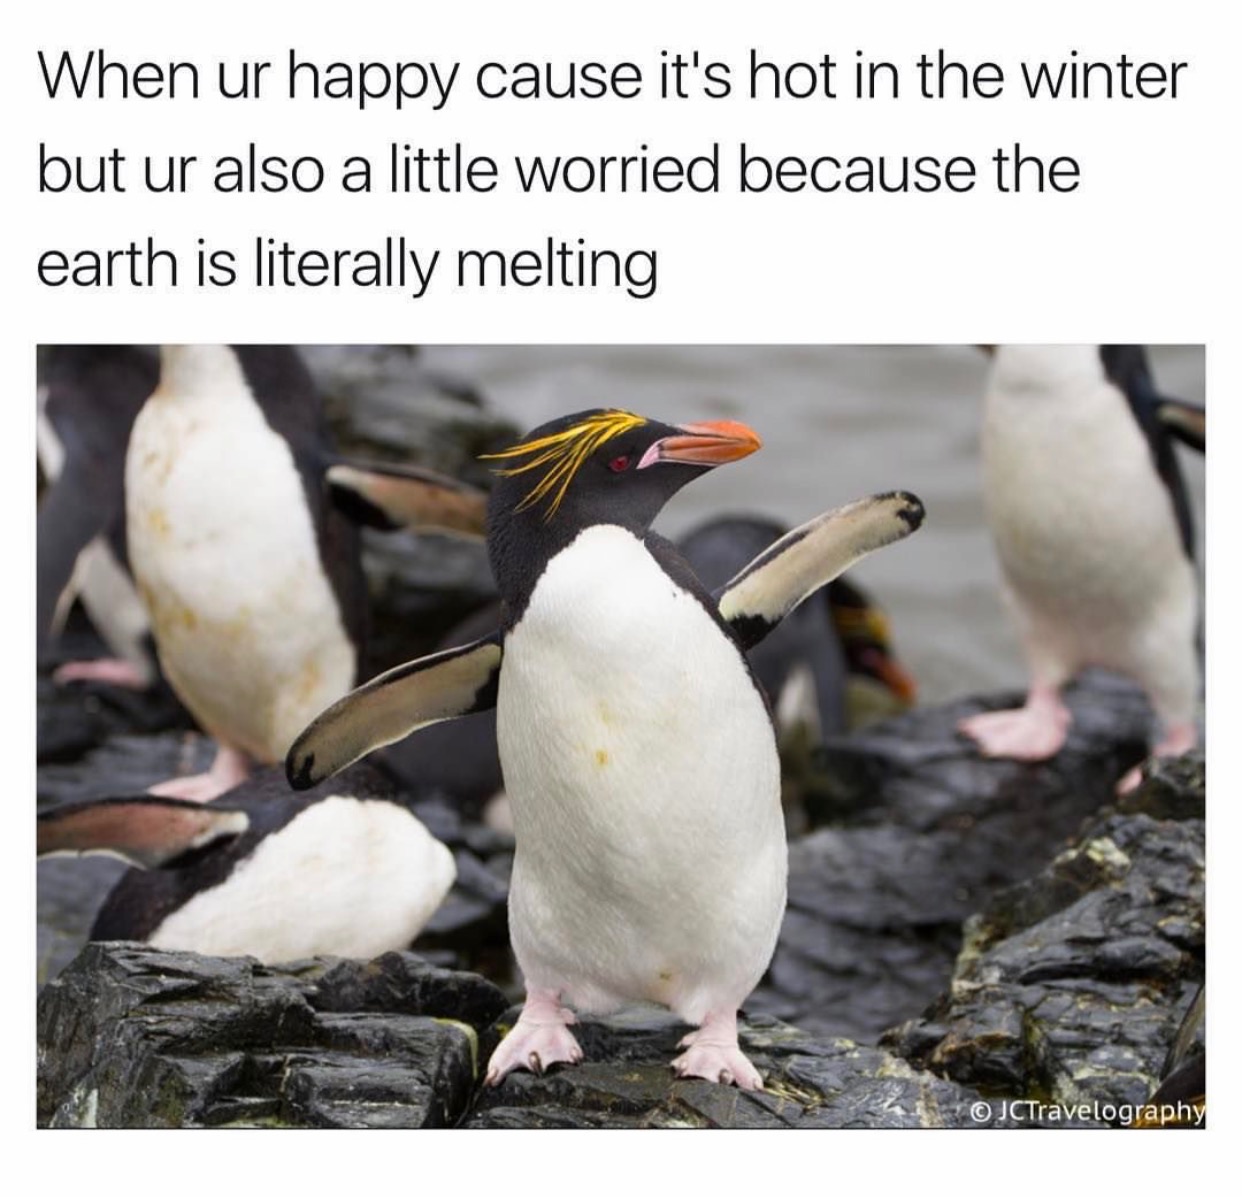 busy penguin - When ur happy cause it's hot in the winter but ur also a little worried because the earth is literally melting JCTravelography